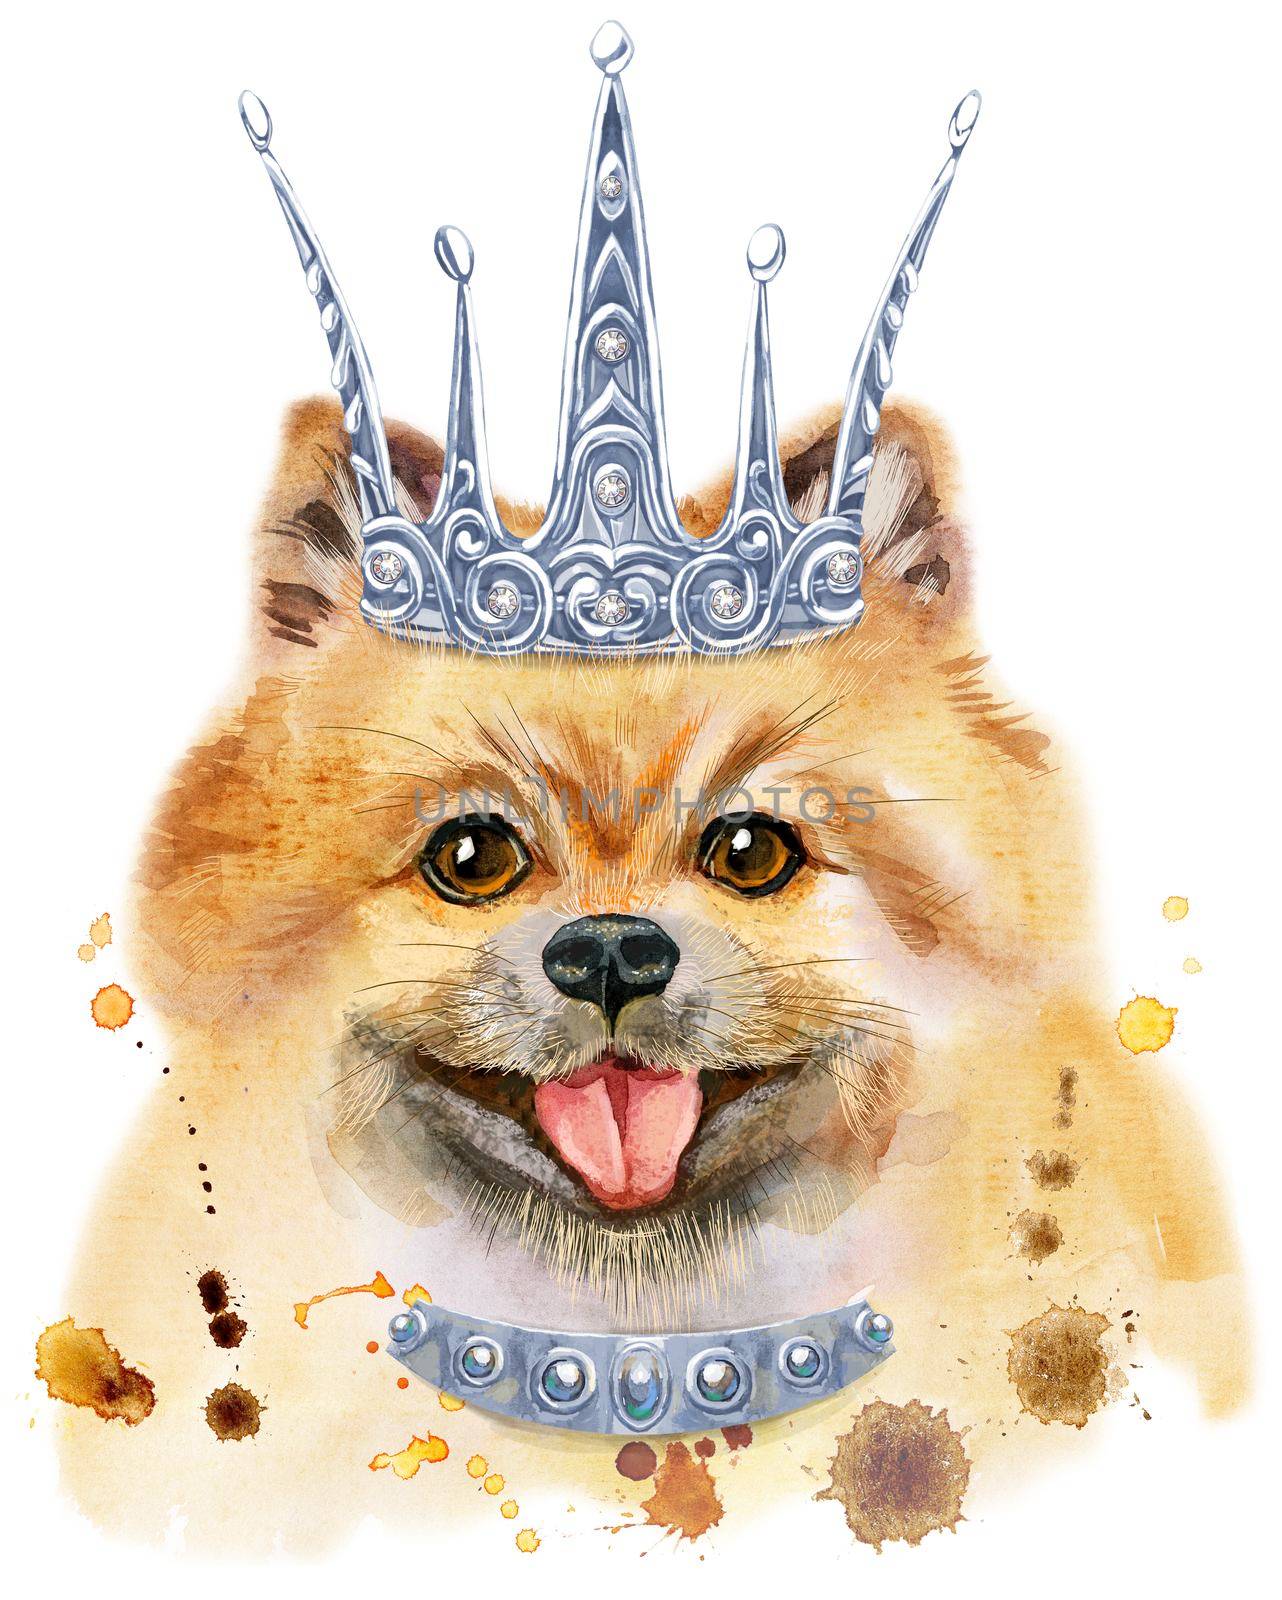 Cute Dog with silver crown. Dog T-shirt graphics. watercolor pomeranian spitz illustration